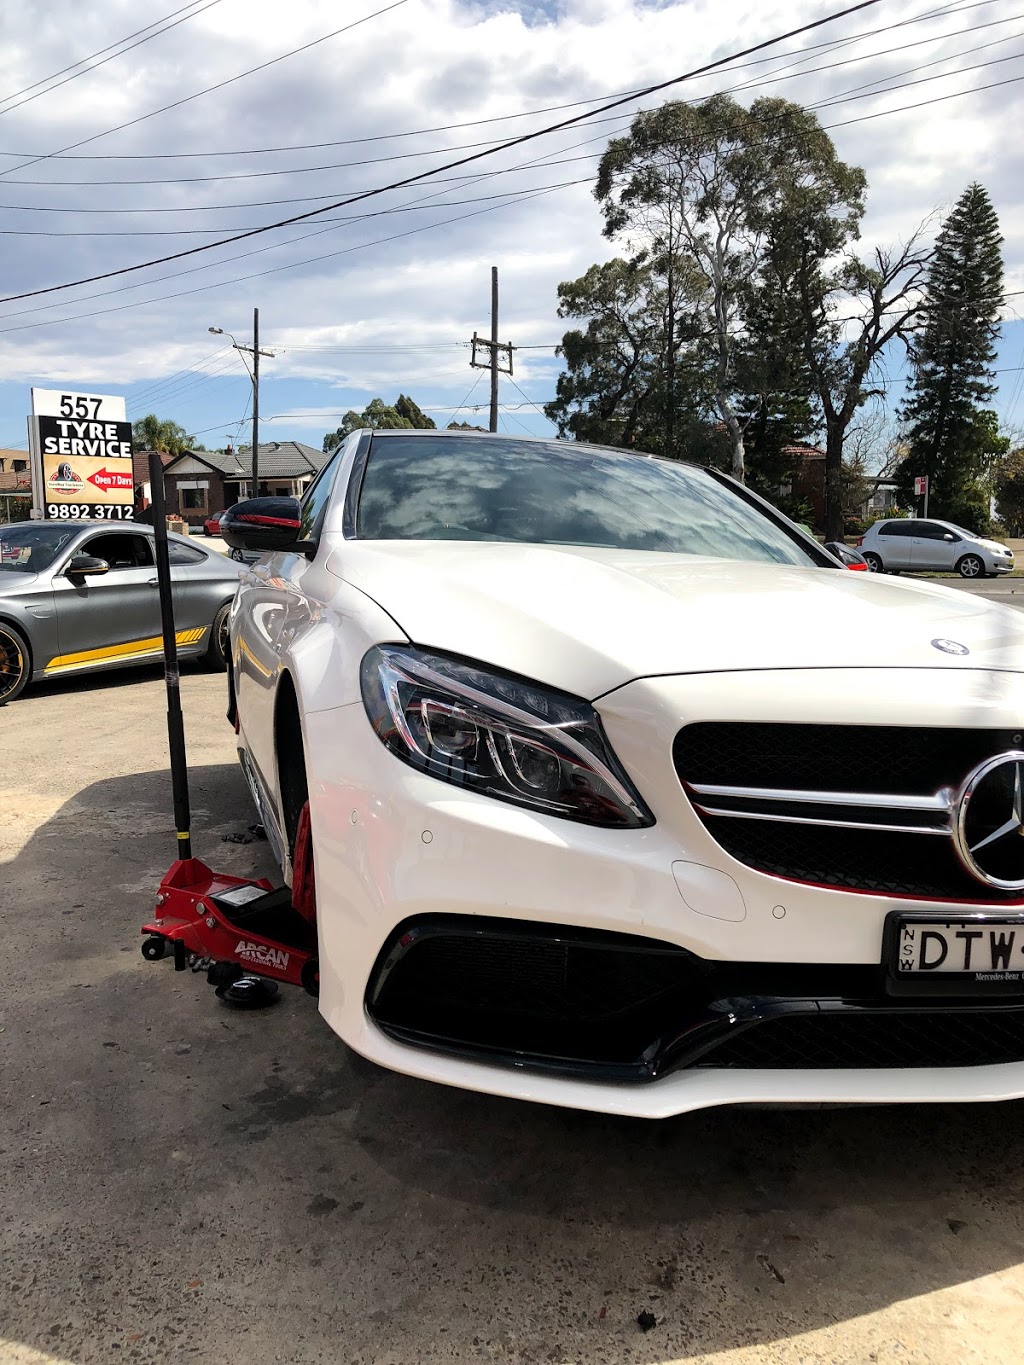 Statewide Tyre Service | car repair | 557 Woodville Rd, Guildford NSW 2161, Australia | 0298923712 OR +61 2 9892 3712